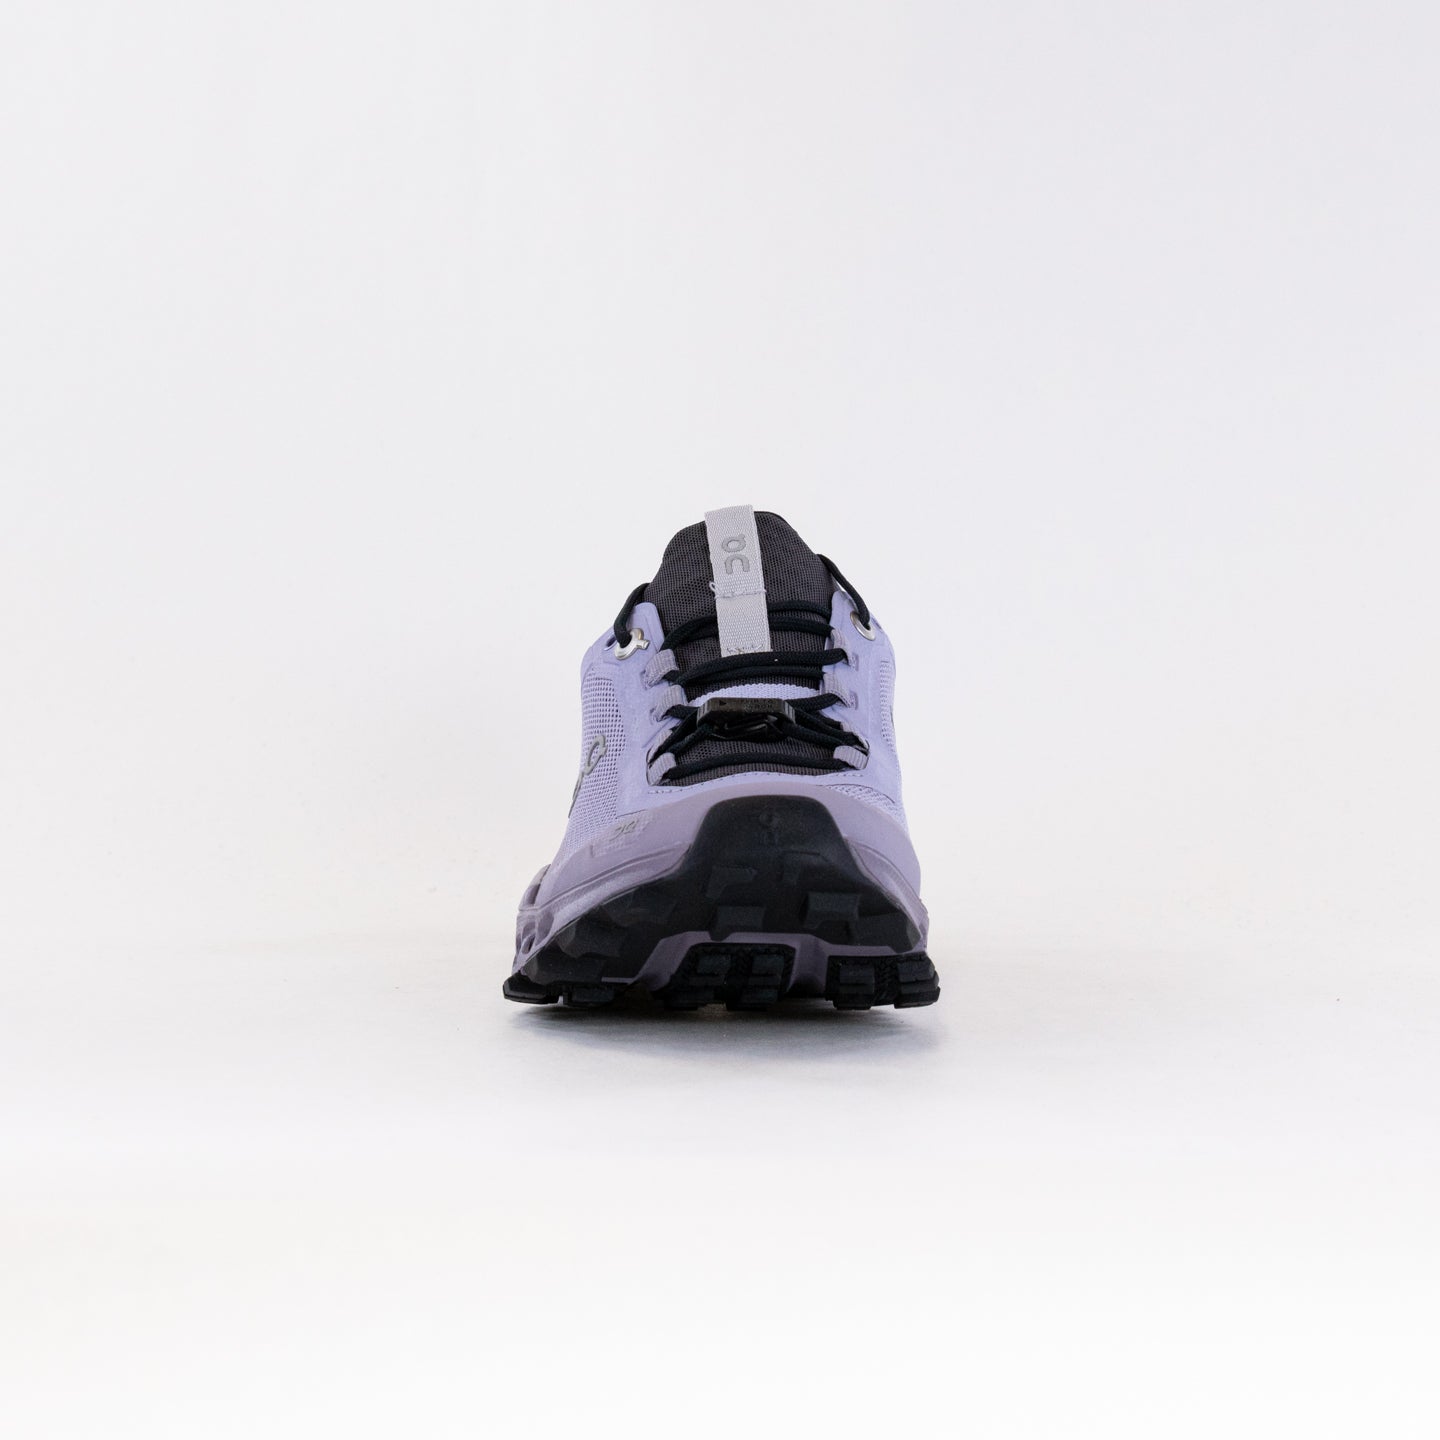 On Cloudultra (Women's) - Lavender/Eclipse